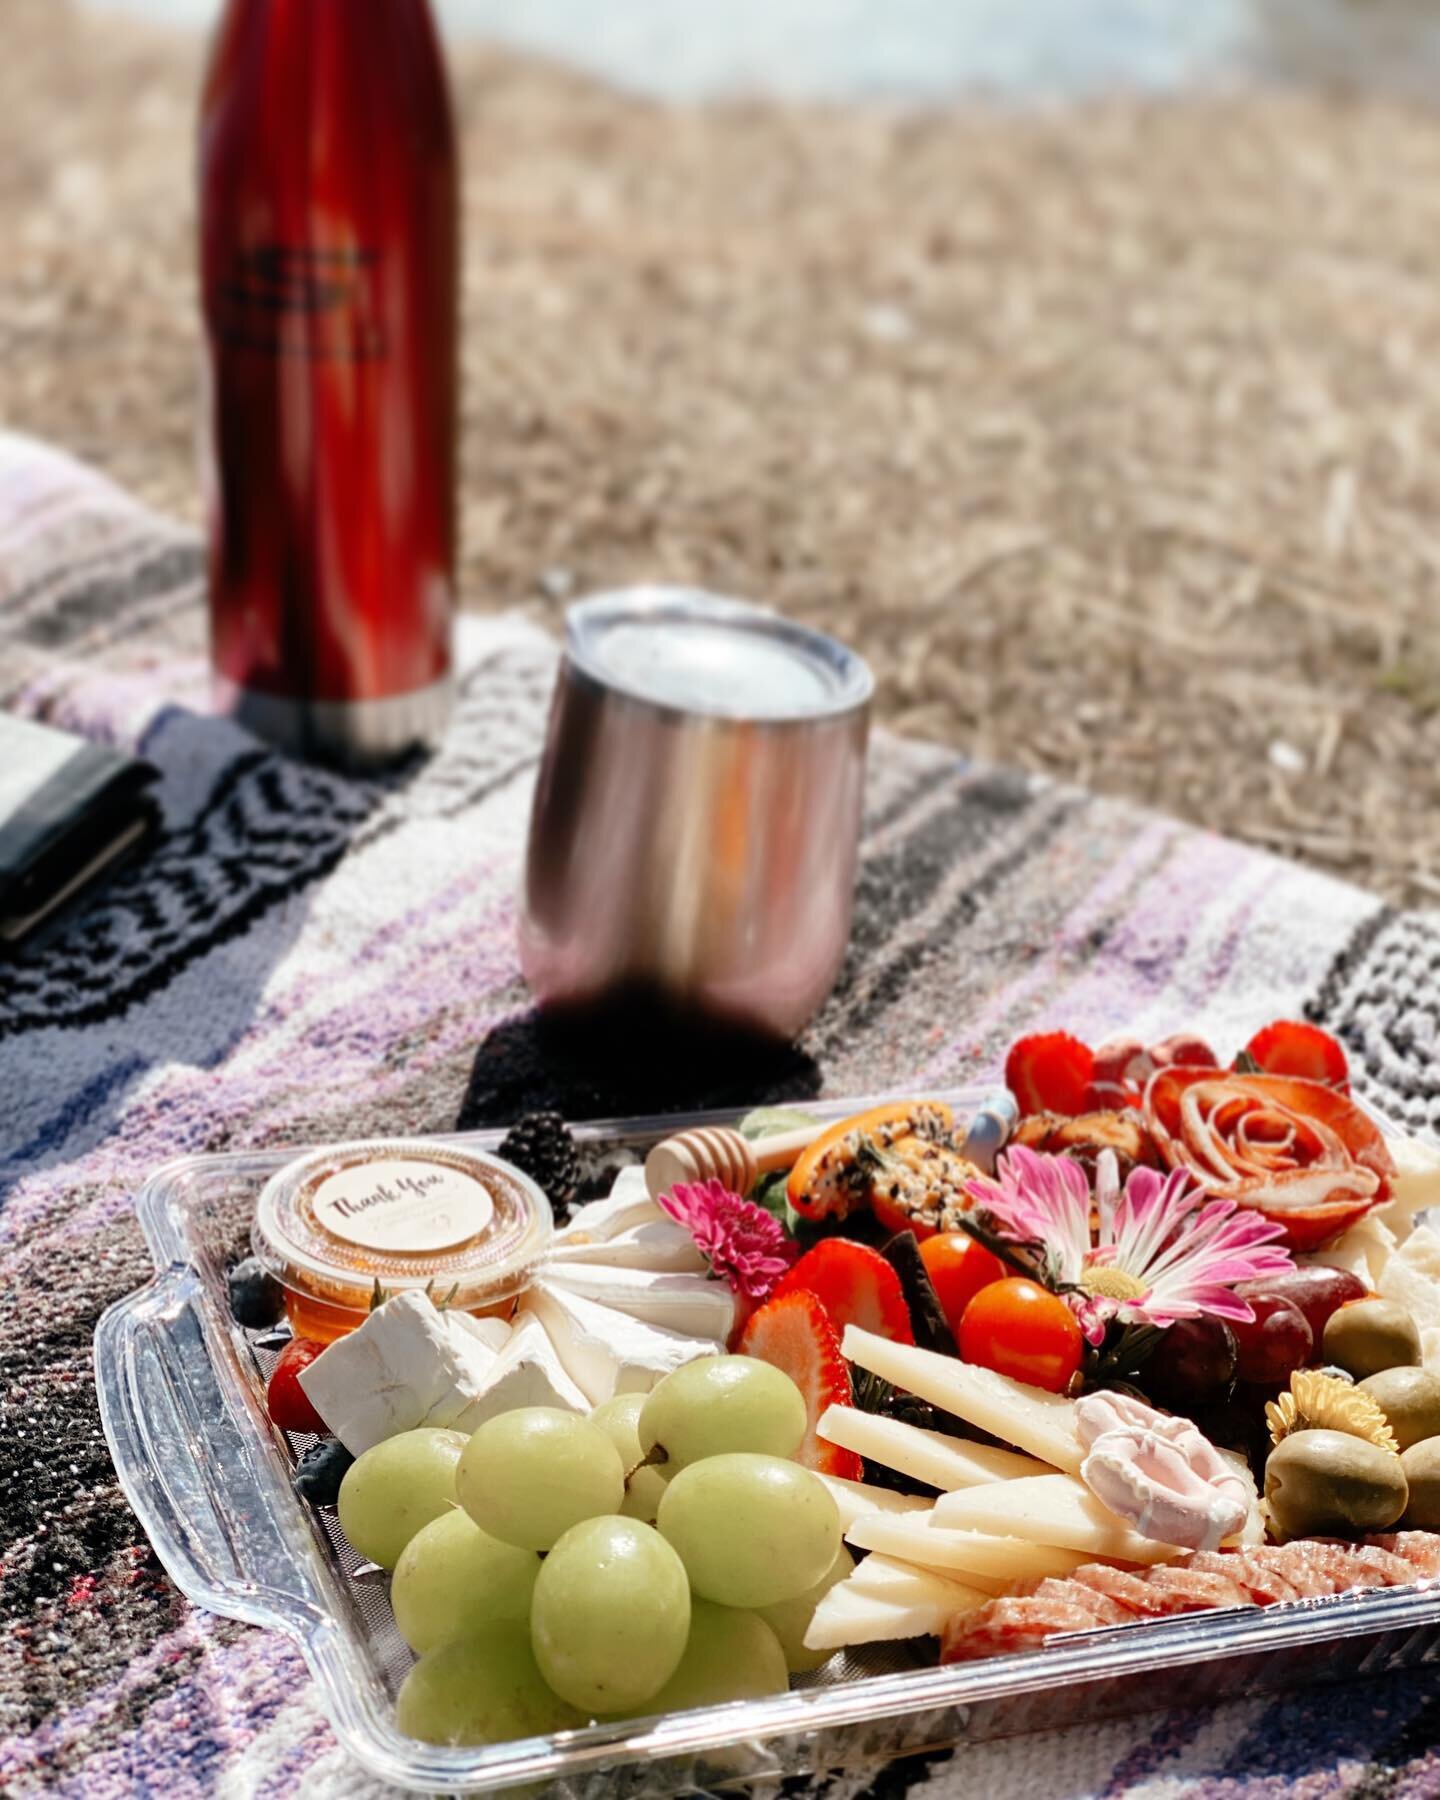 We had a wonderful picnic date this weekend. All thanks to the wonderful Tina at @bountifulboardsofbend for making it so special! No shame, but we crushed the whole thing. Ben kept making comments like &ldquo;wow she thought of EVERYTHING&rdquo;. Hig